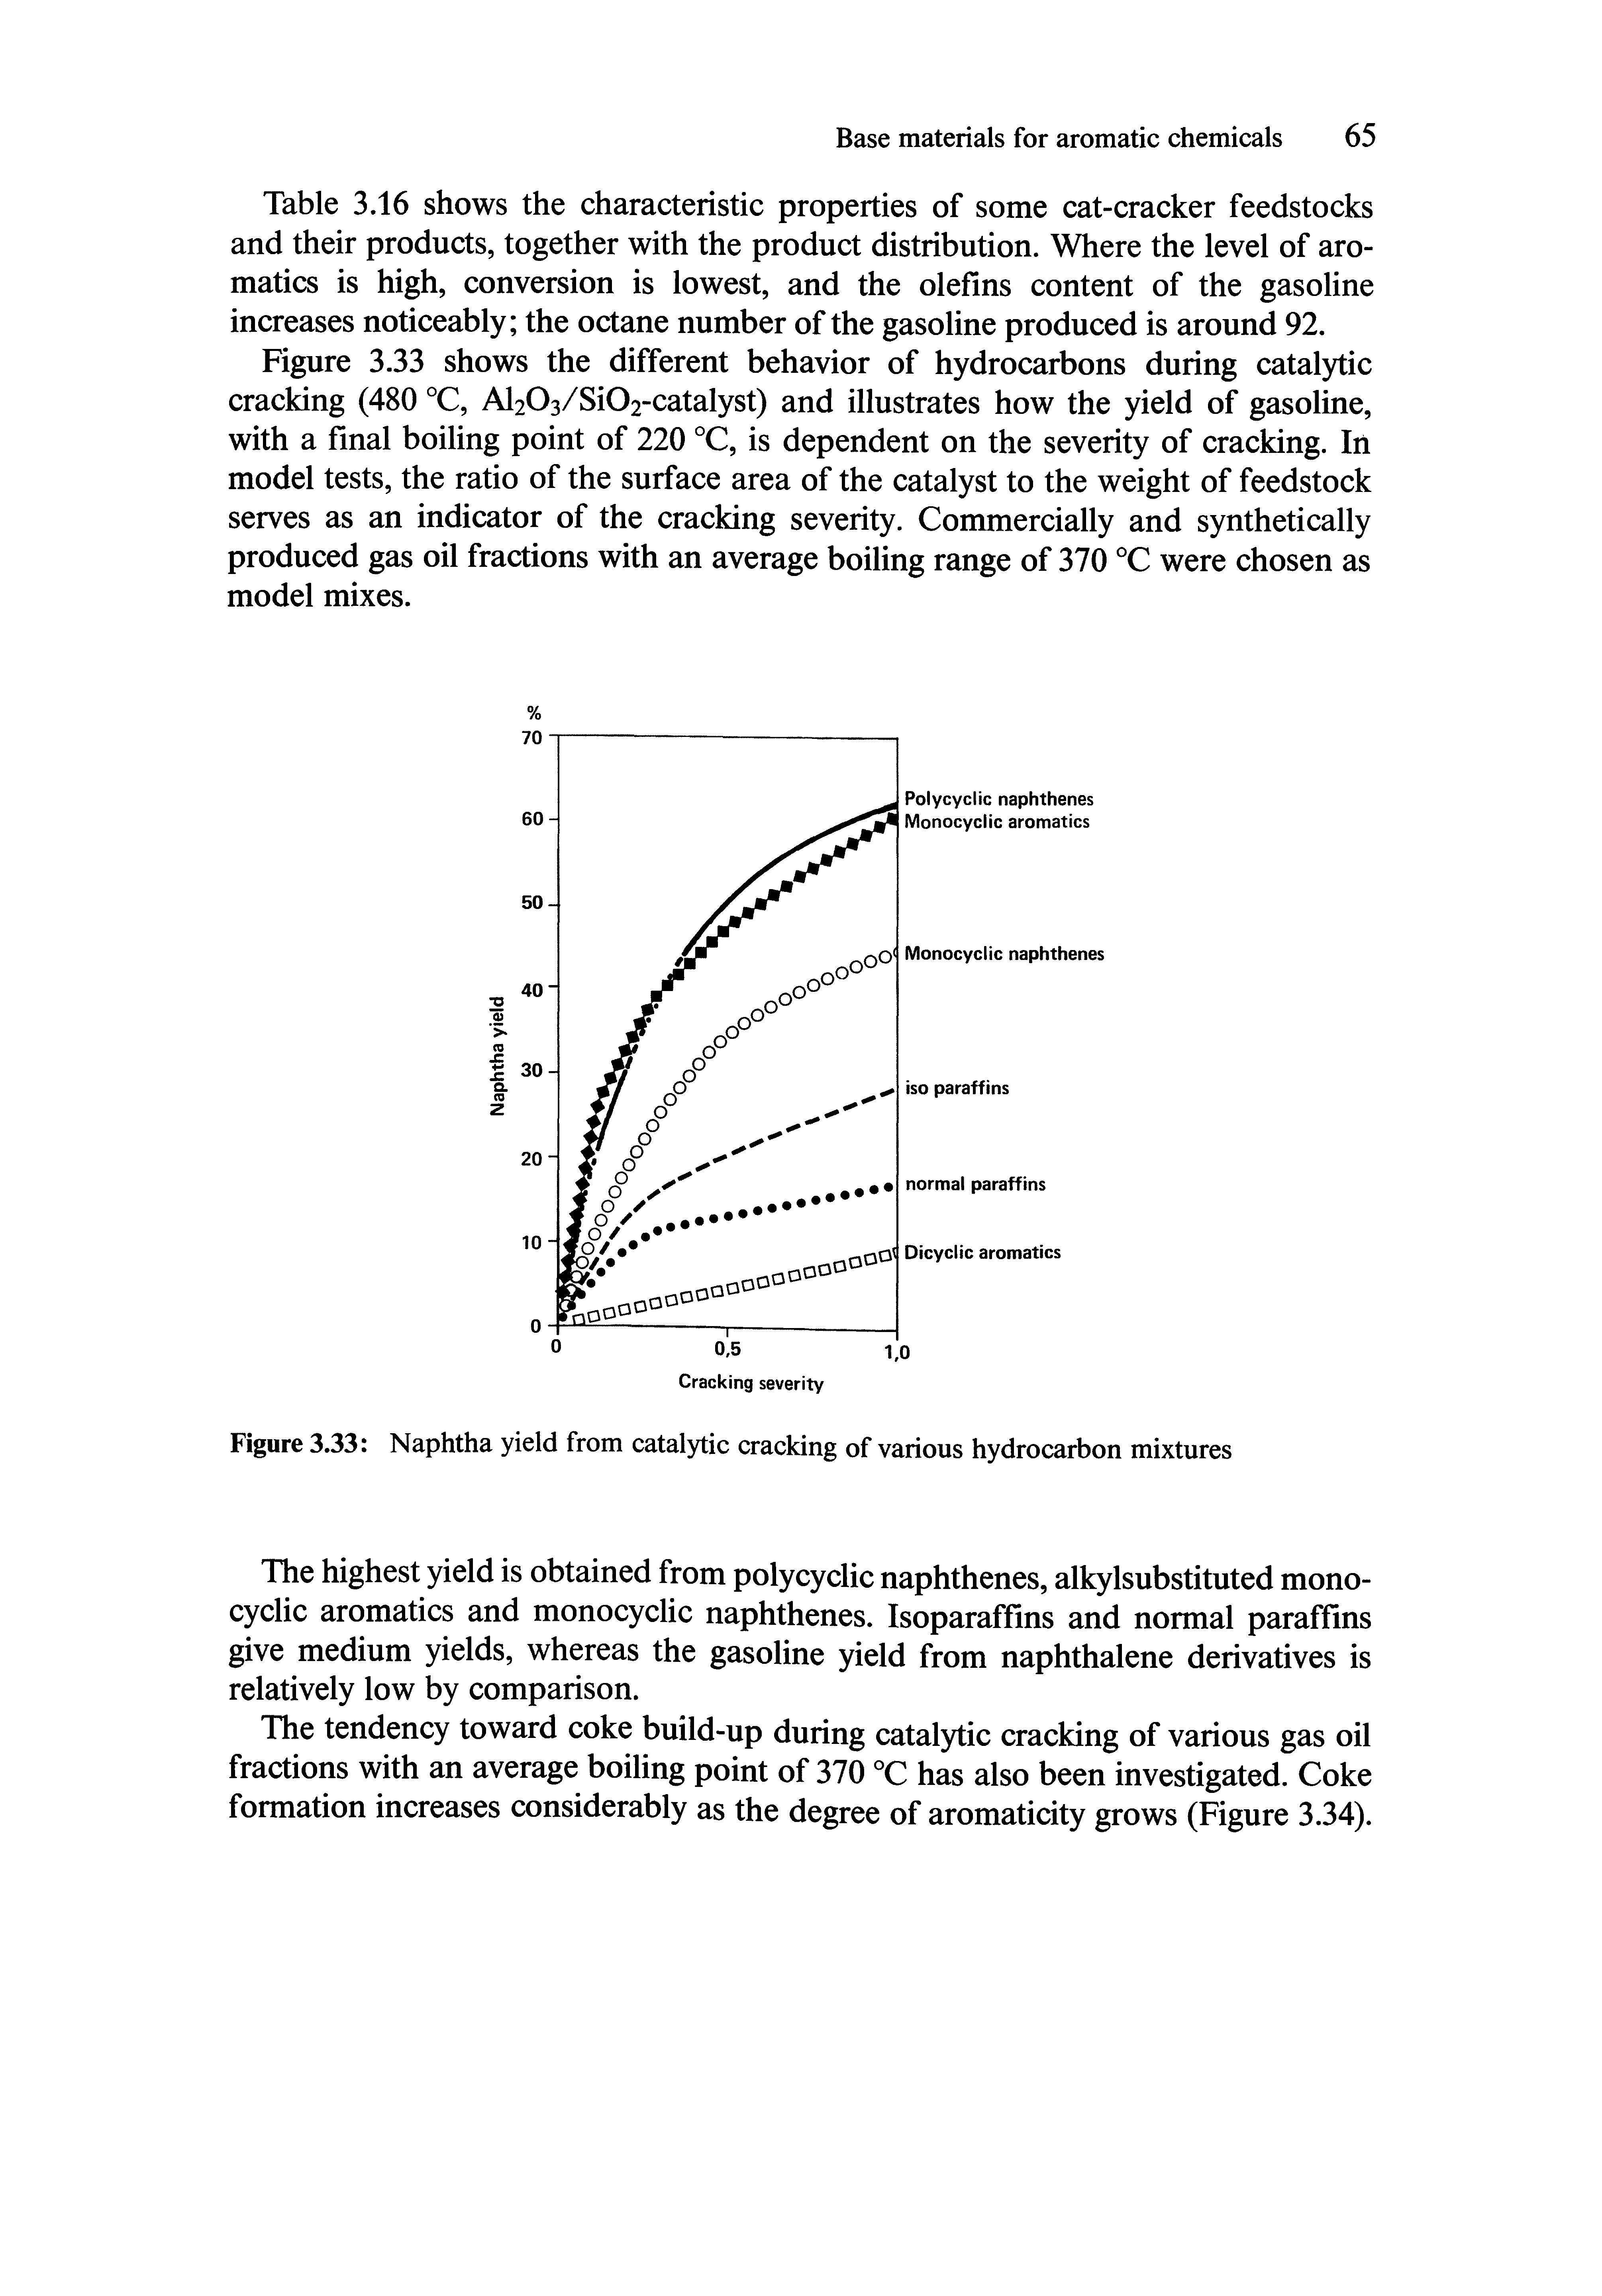 Figure 3.33 Naphtha yield from catalytic cracking of various hydrocarbon mixtures...